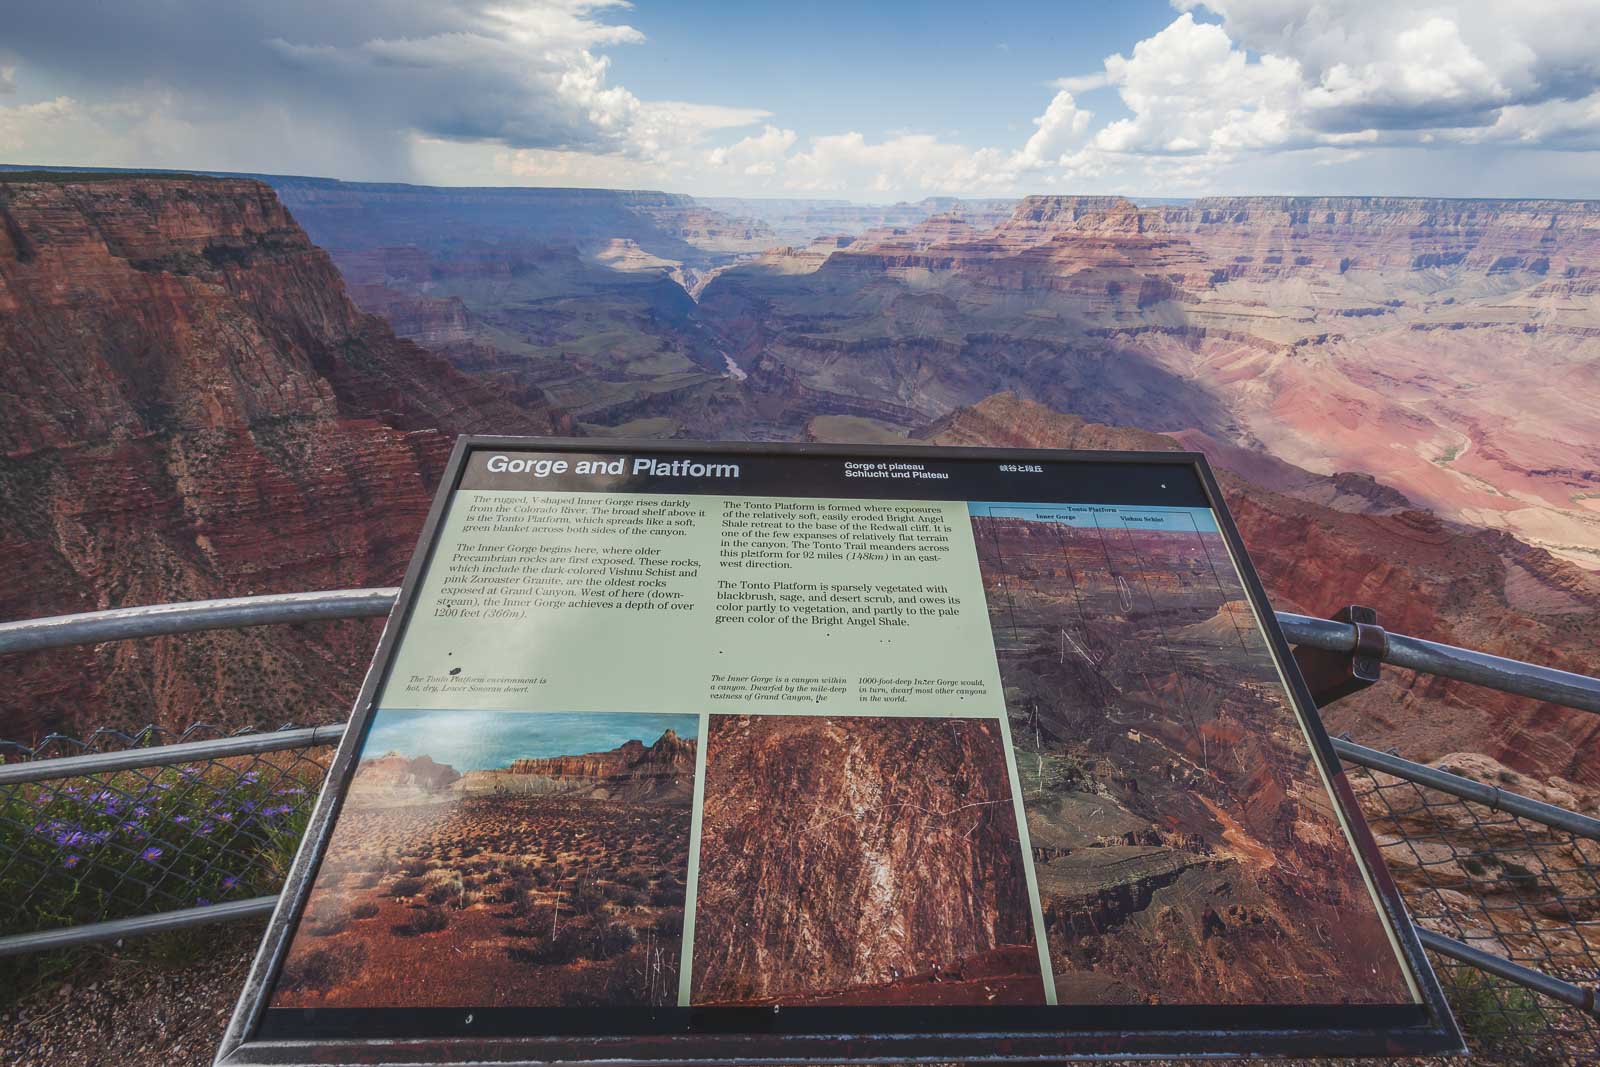 Facts about the Grand Canyon